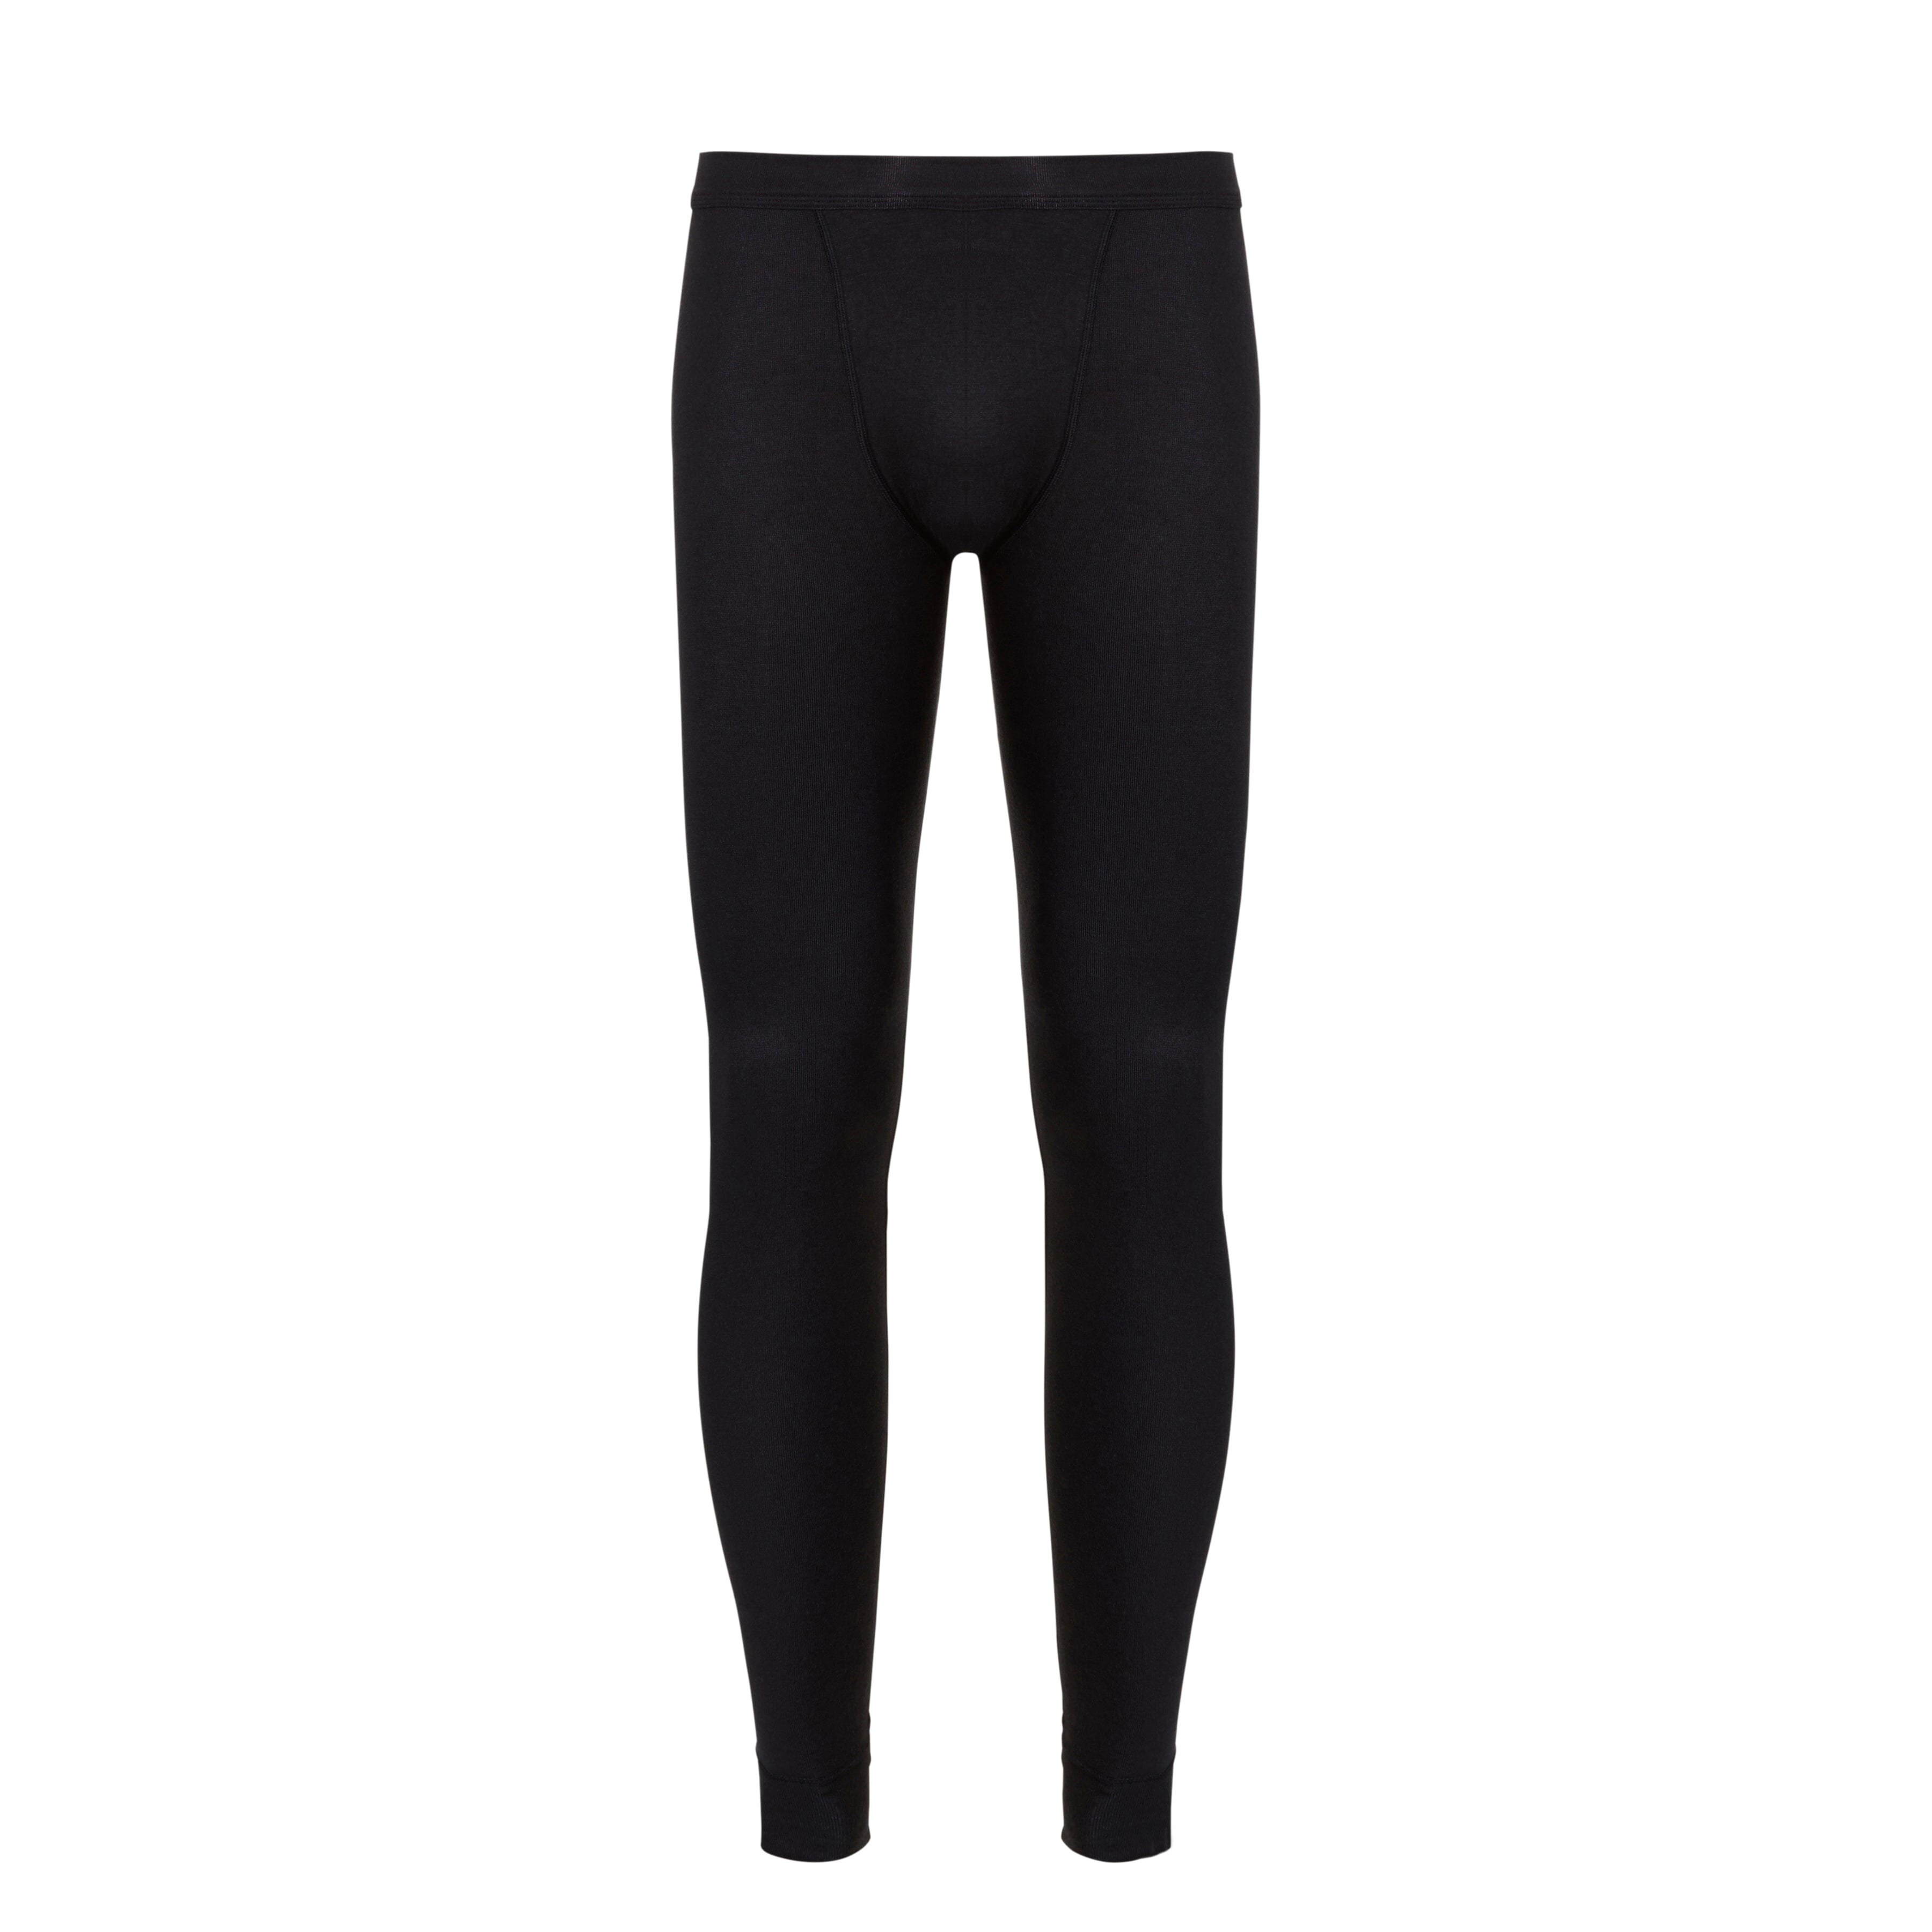 Ten Cate - 30245 - Thermo Pants Heren - Black Thermo Ondergoed Ten Cate 